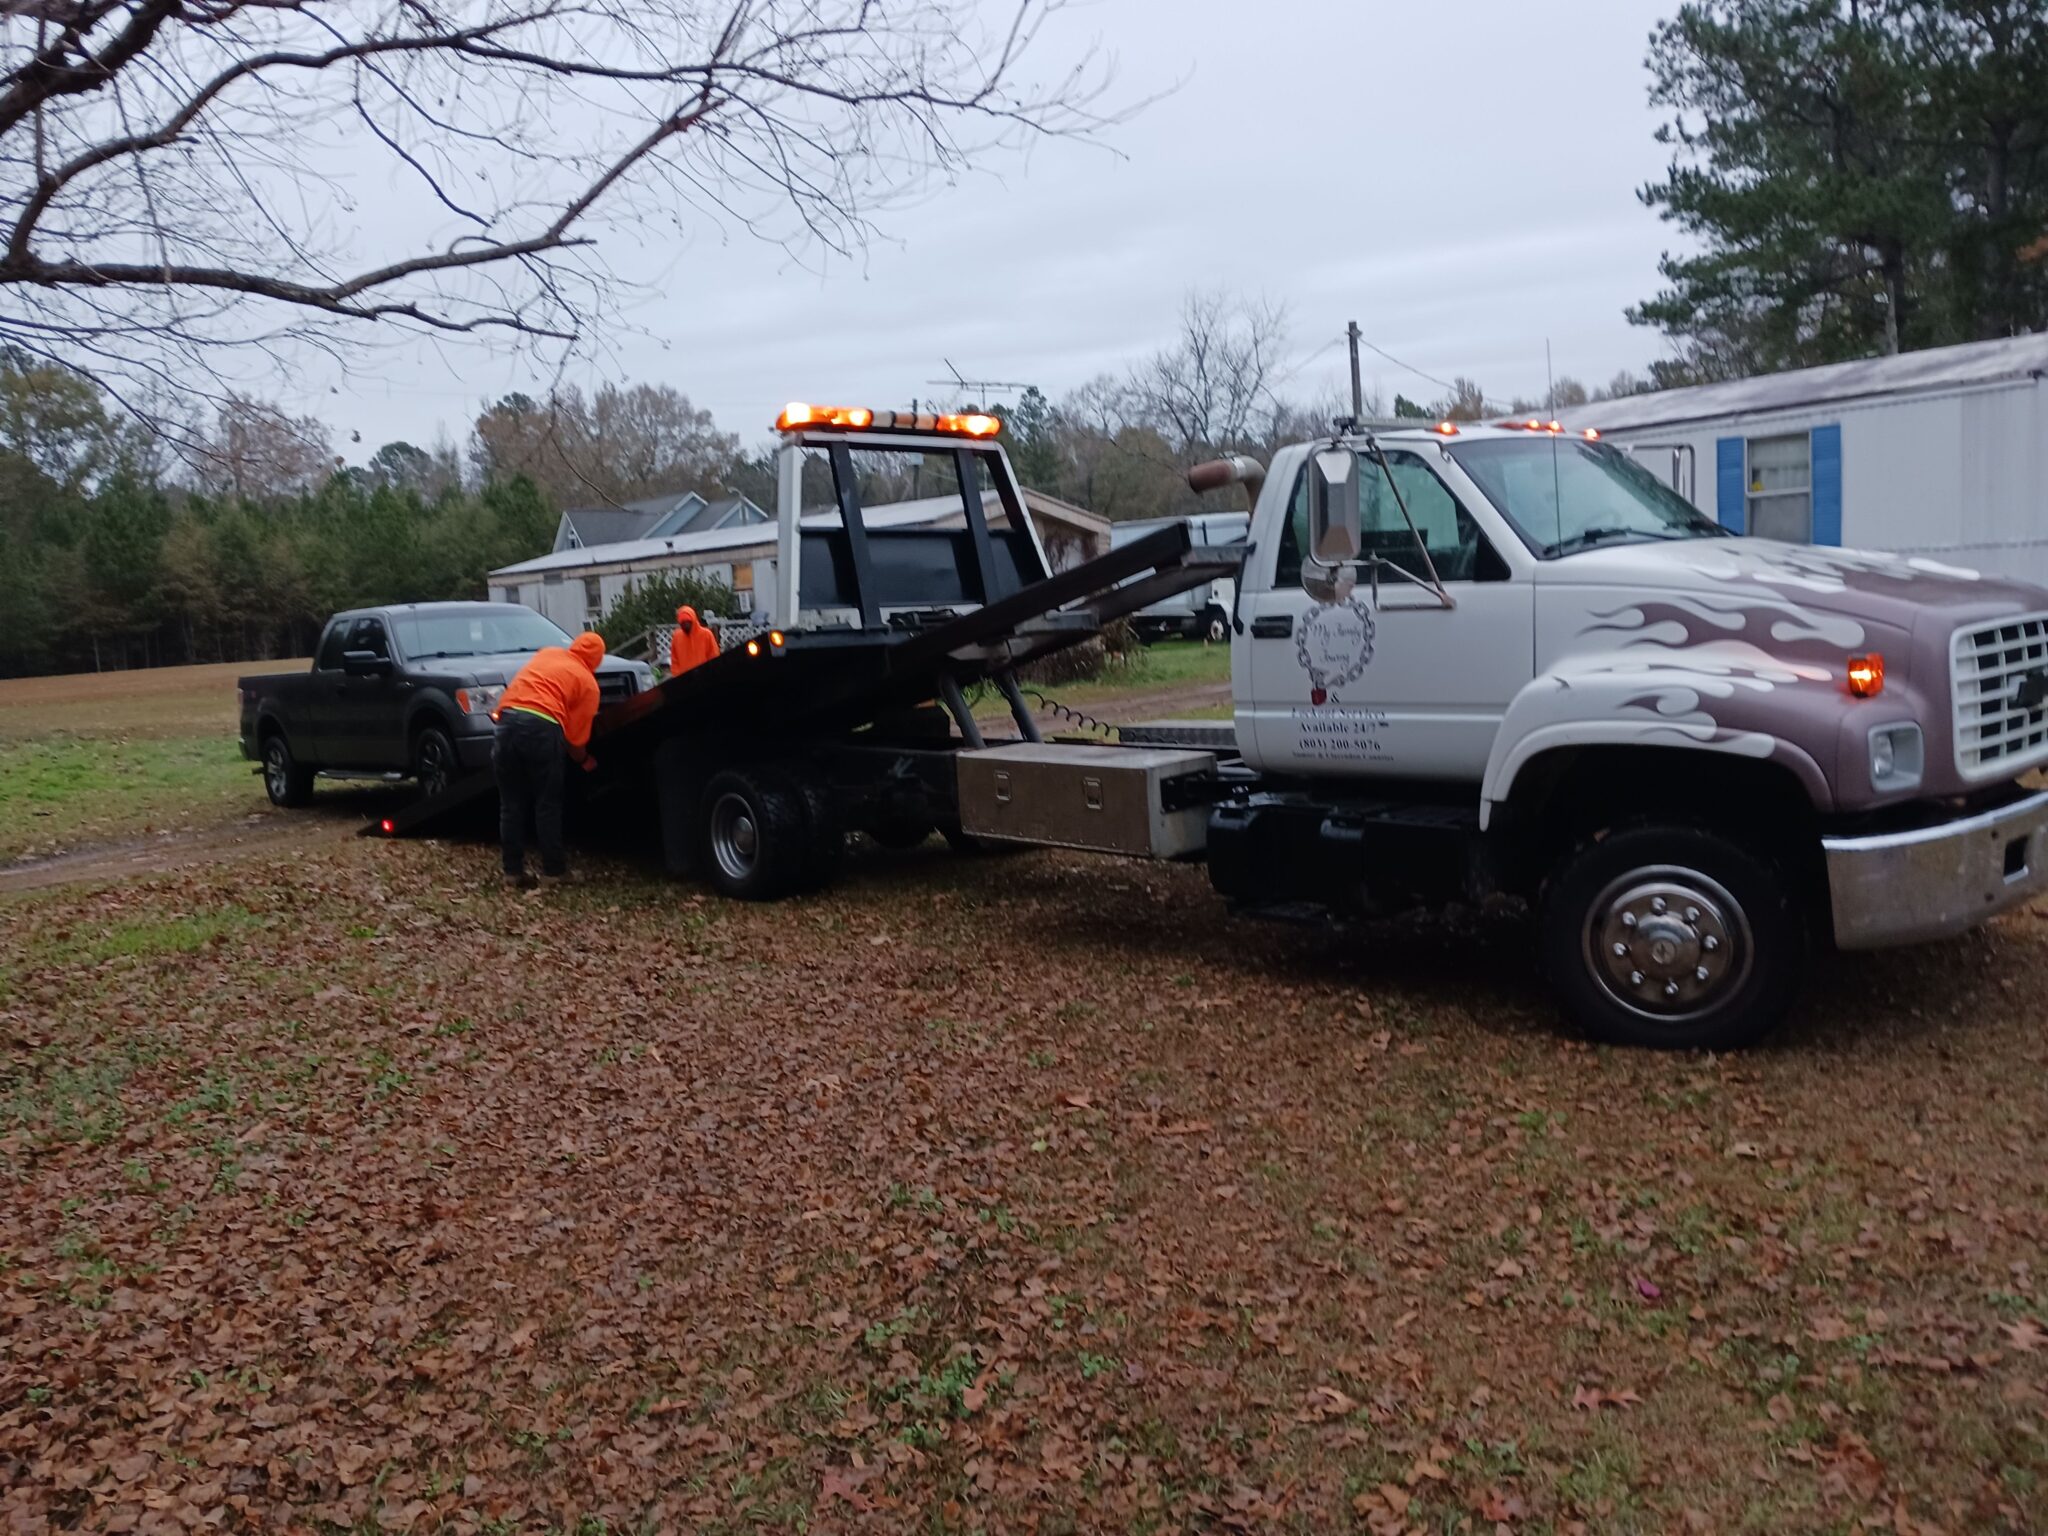 Count on us to solve your towing problems!